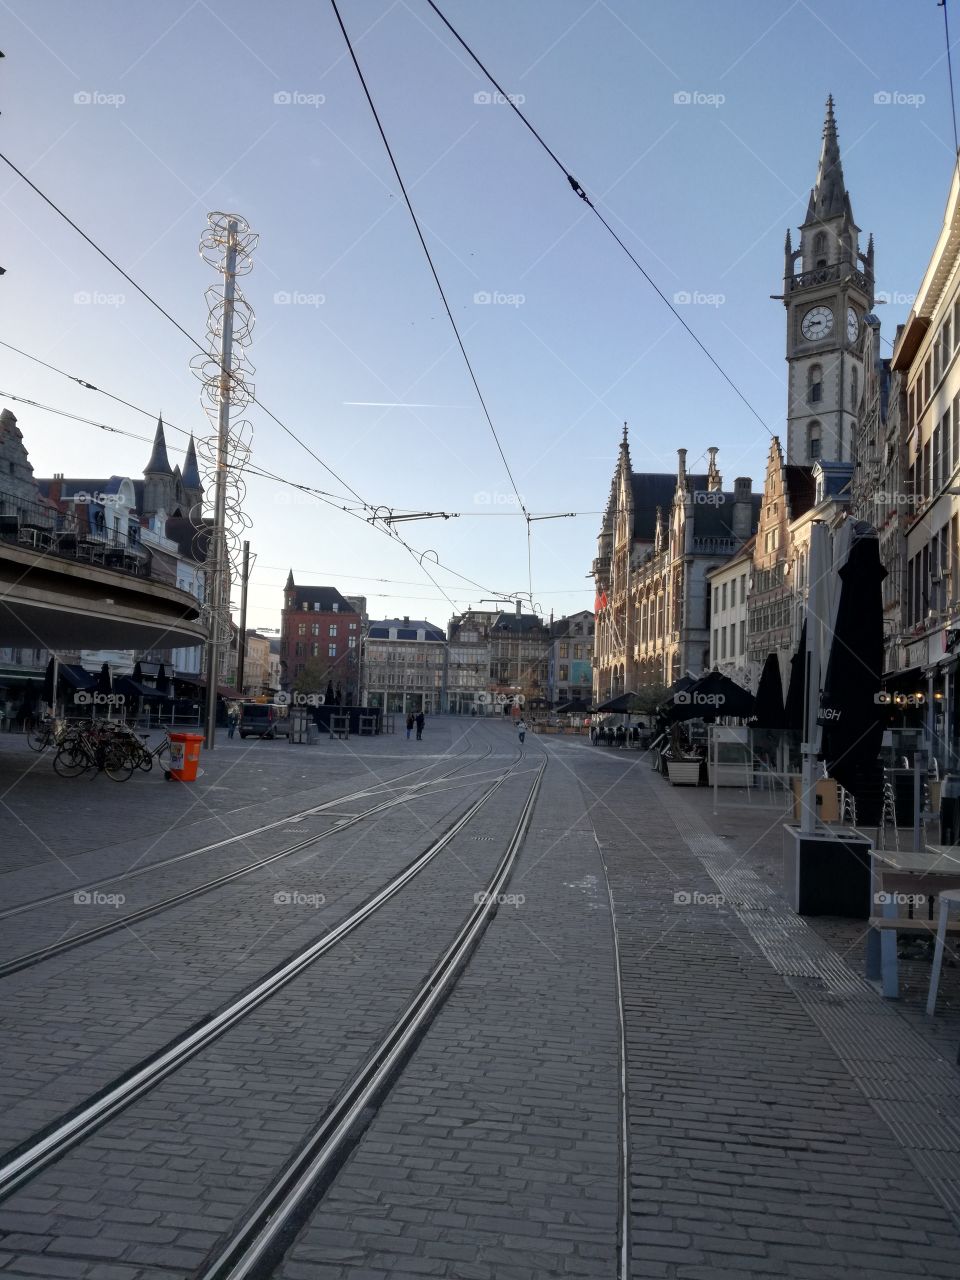 Morning in Gent